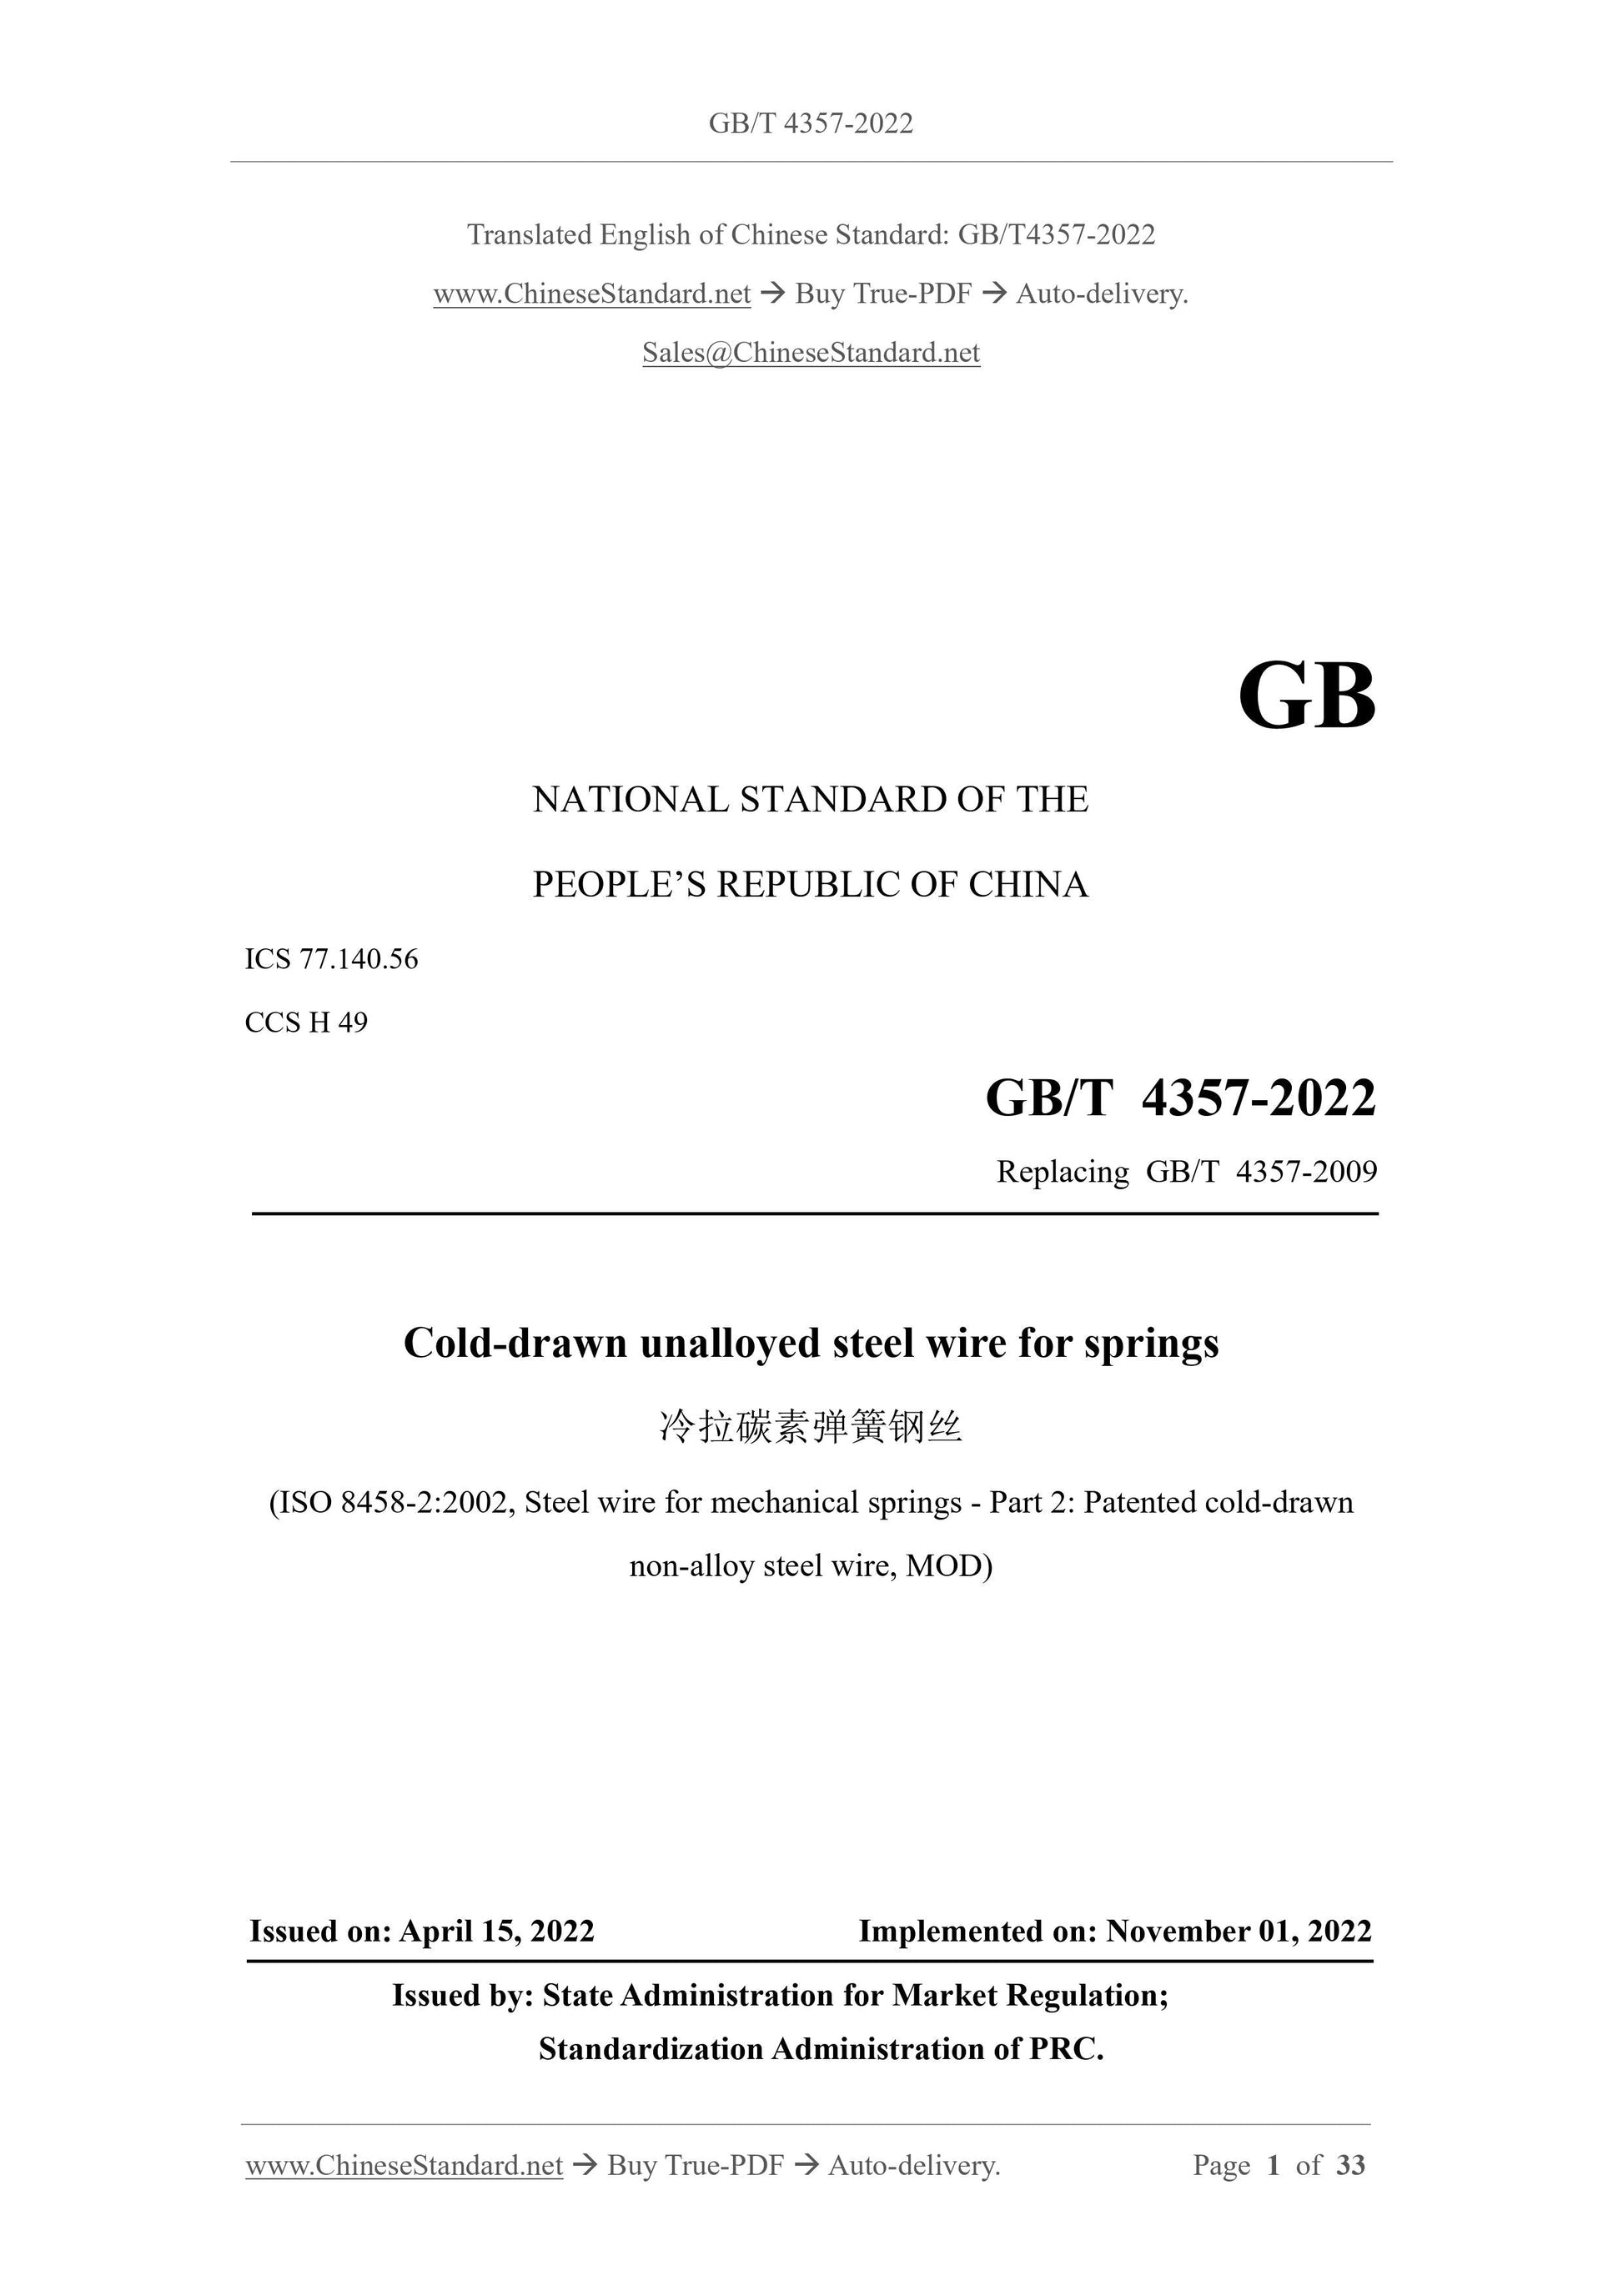 GB/T 4357-2022 Page 1